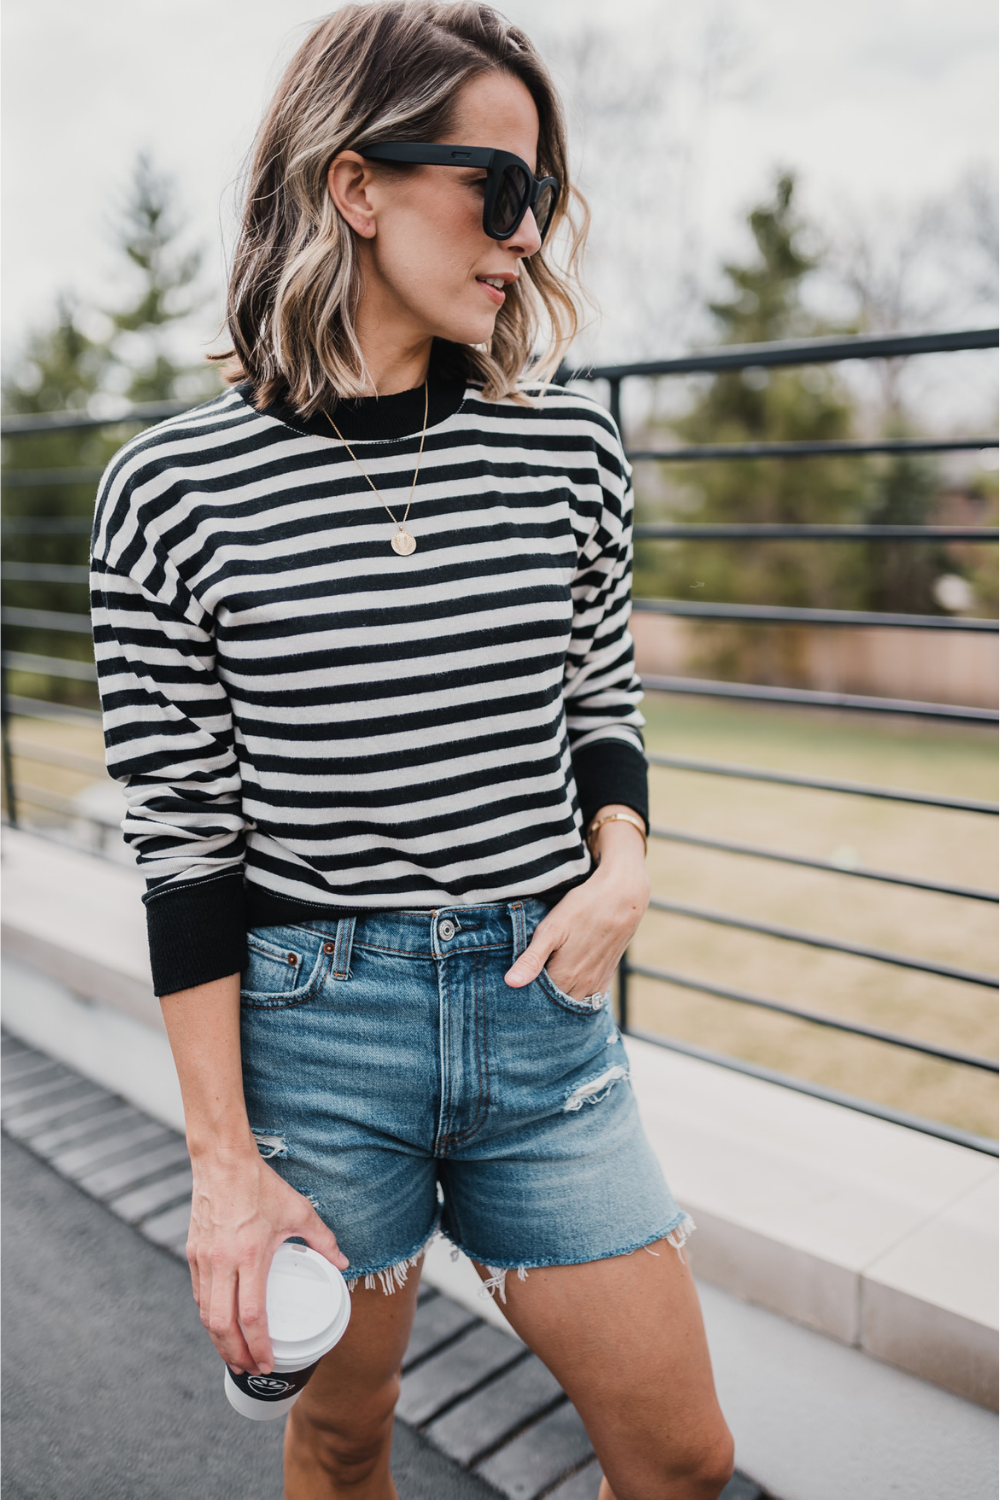 Suzanne wearing a striped long sleeve t-shirt, denim shorts, and sunglasses